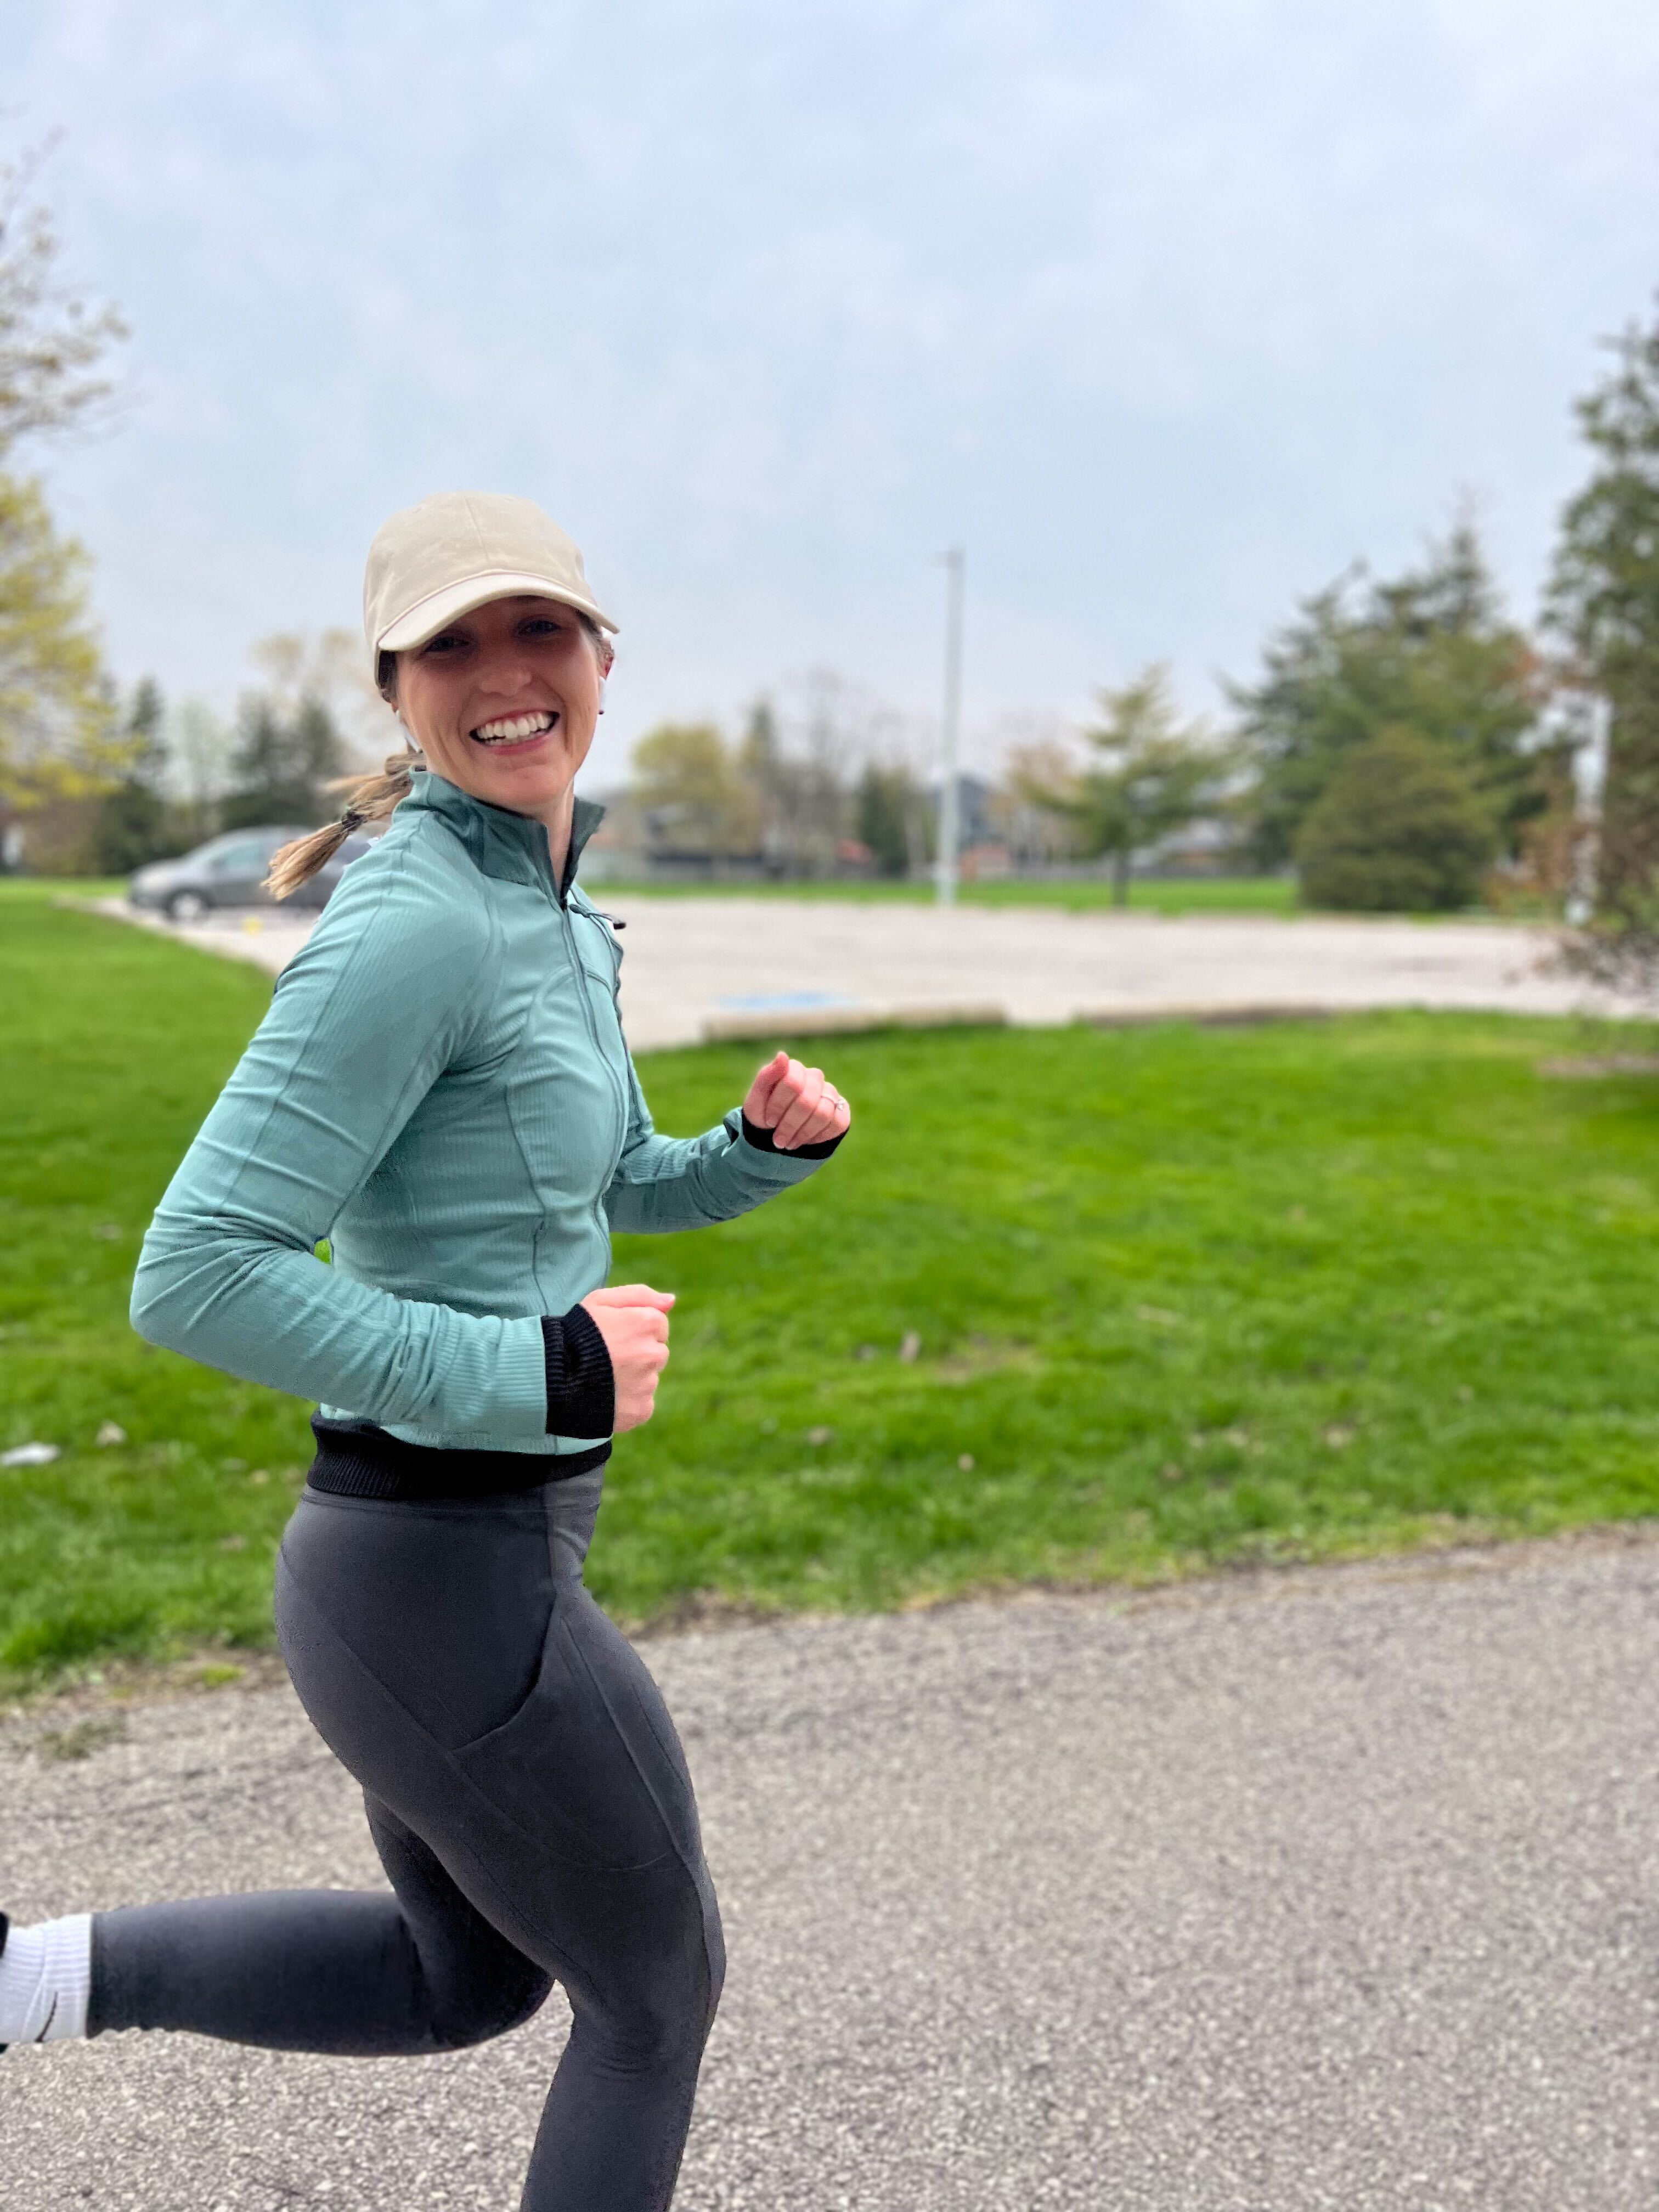 A woman running outdoors with a smile on her face